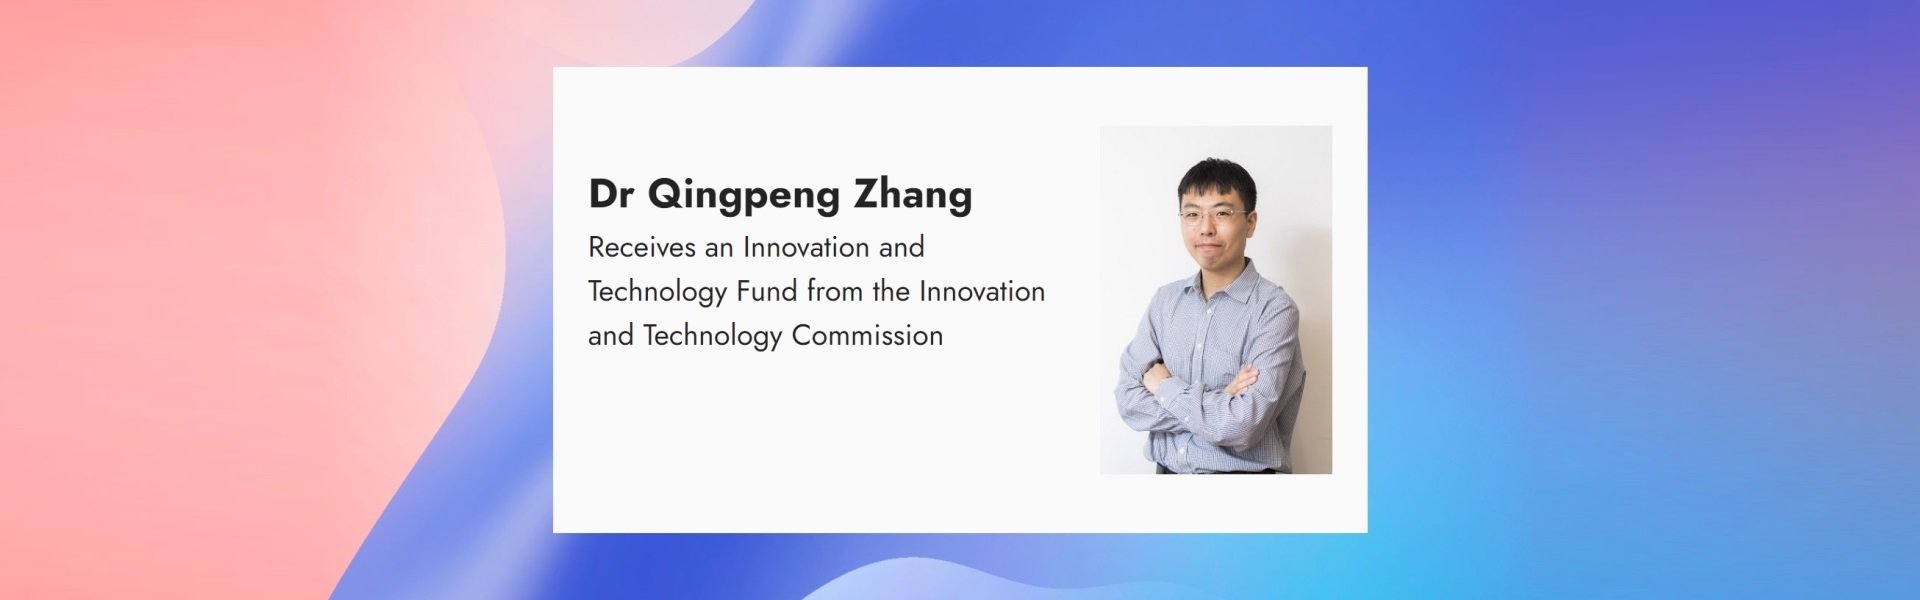 Dr Qingpeng Zhang Receives an Innovation and Technology Fund from the Innovation and Technology Commission